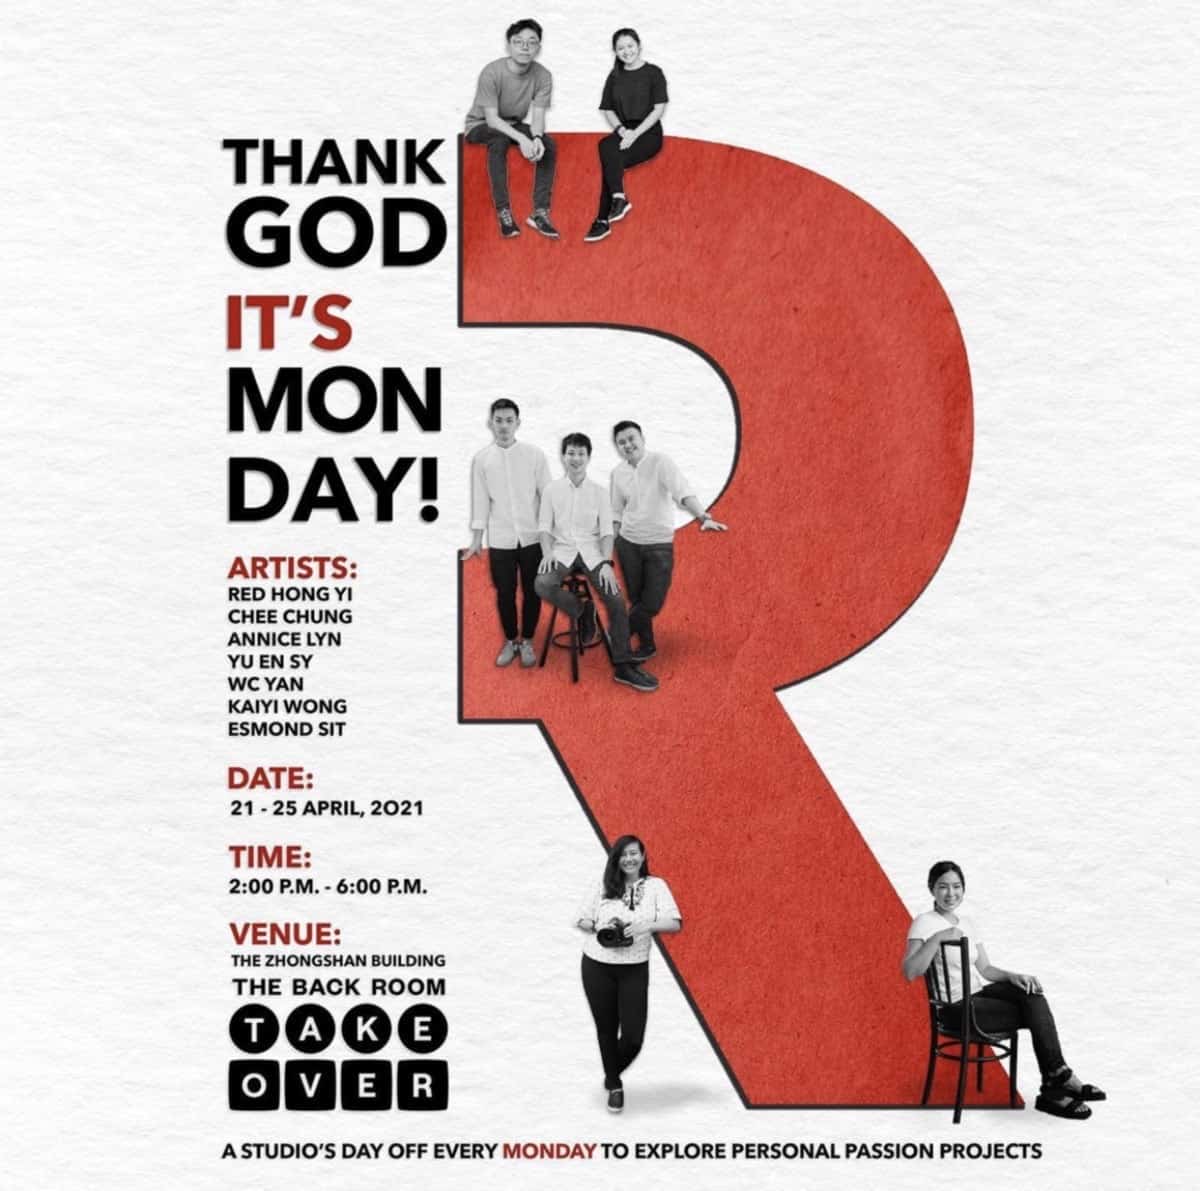 Poster of Red Hong Yi and her team on having Mondays off